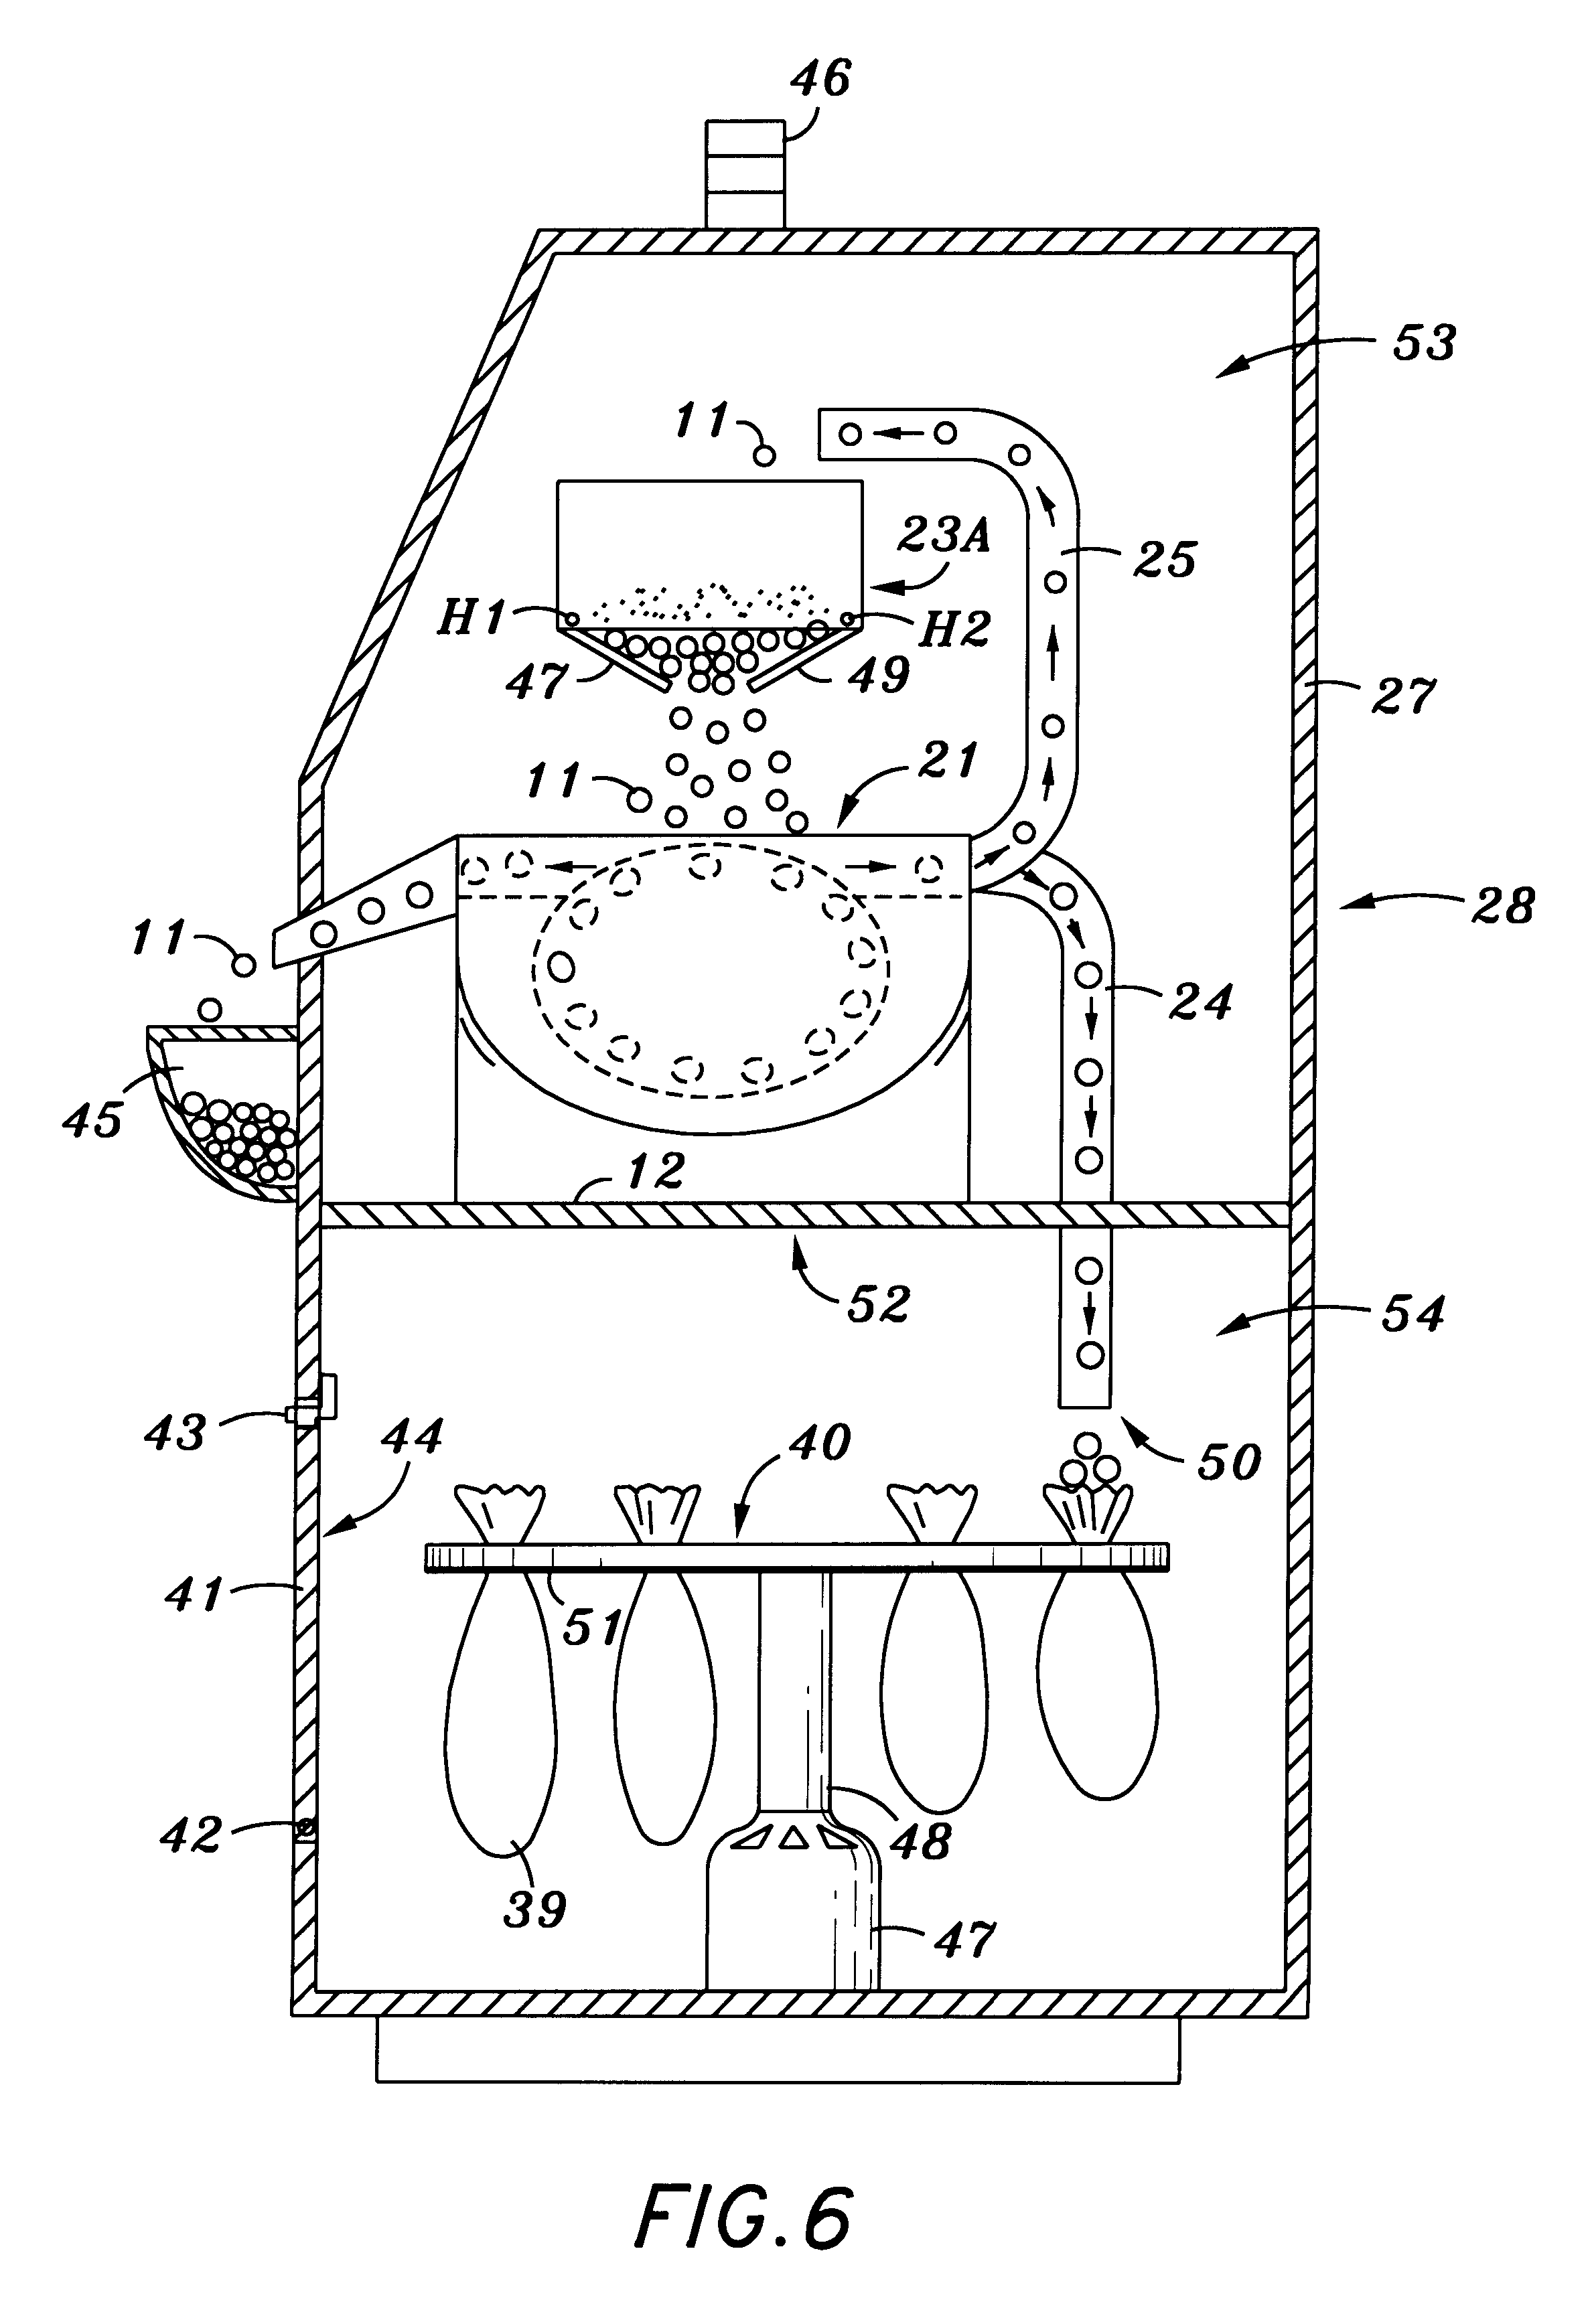 Coin delivery, storage and dispensing system for coin operated machines and method for same